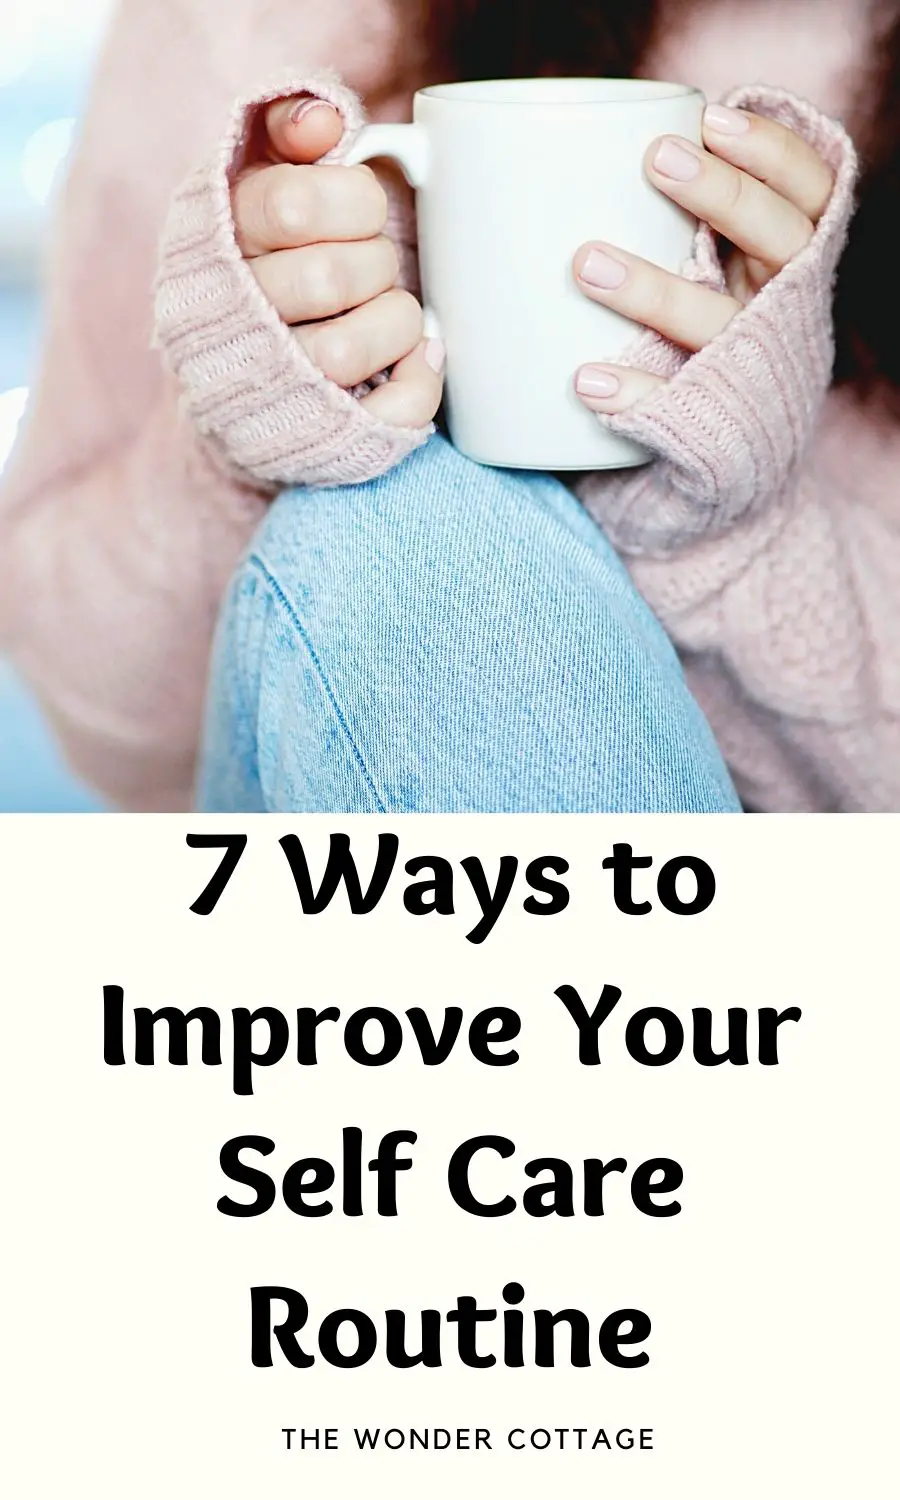 7 Ways to Improve Your Self Care Routine